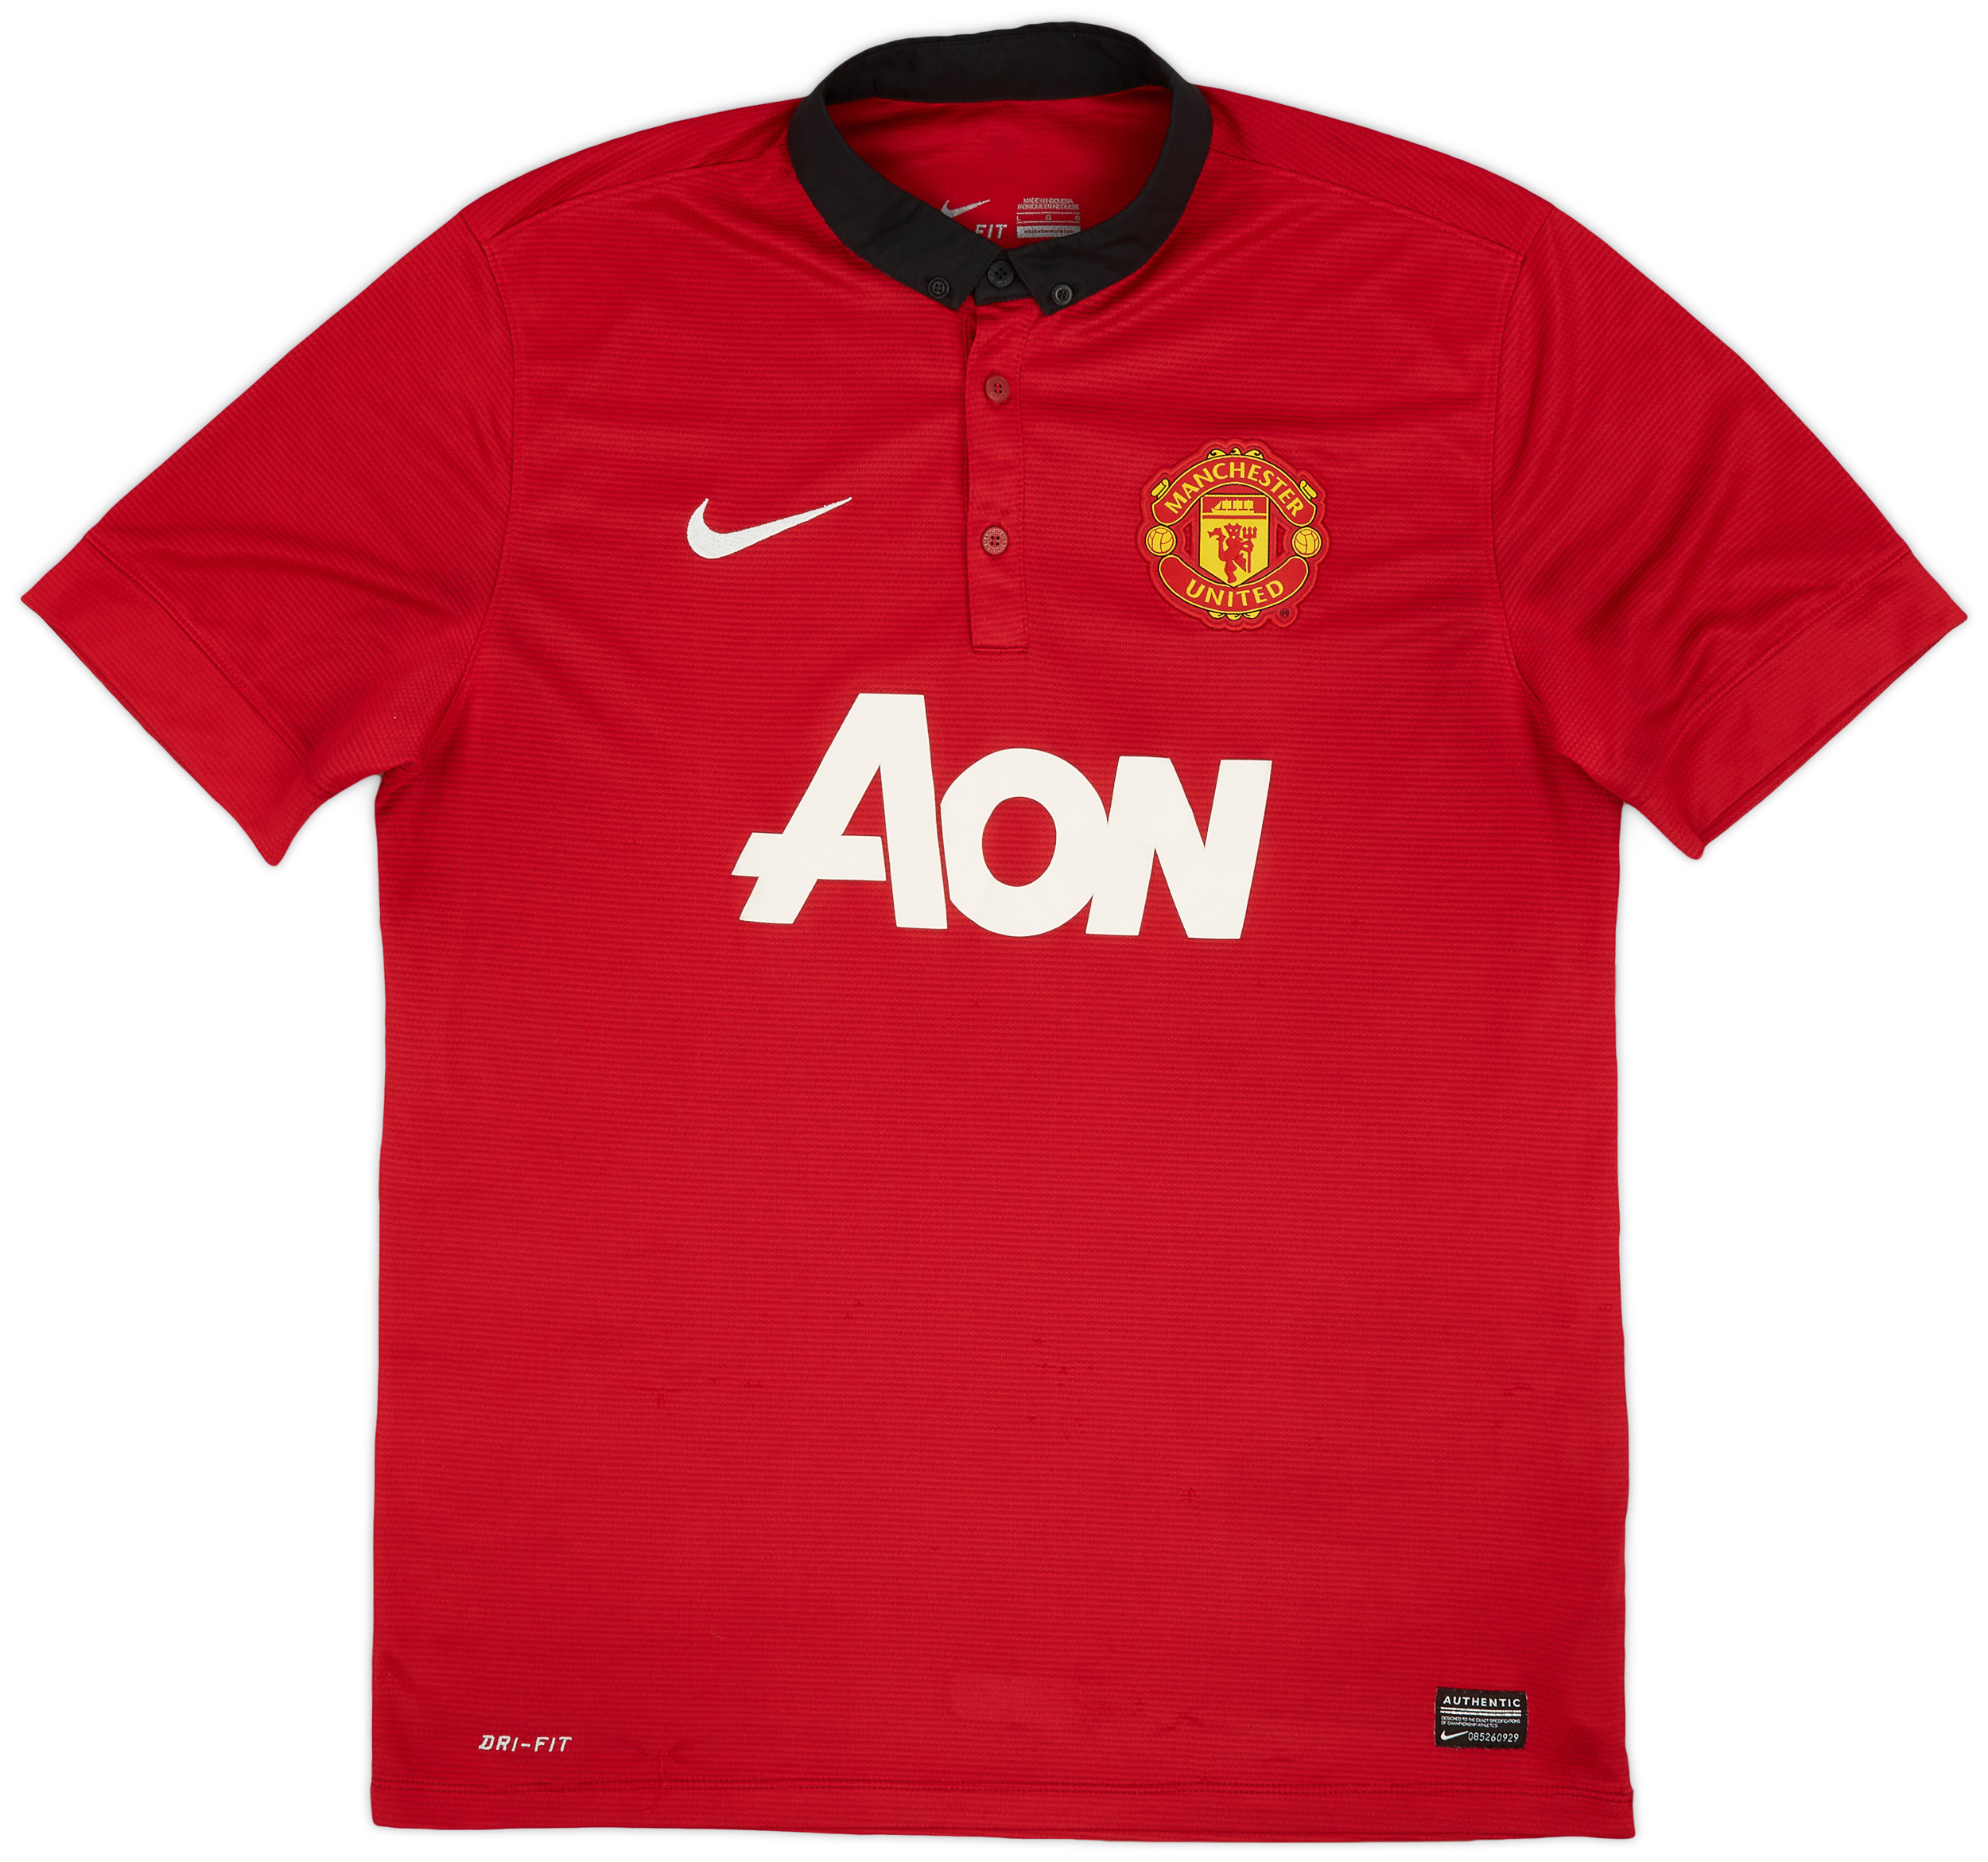 2013-14 Manchester United Home Shirt - 7/10 - ()